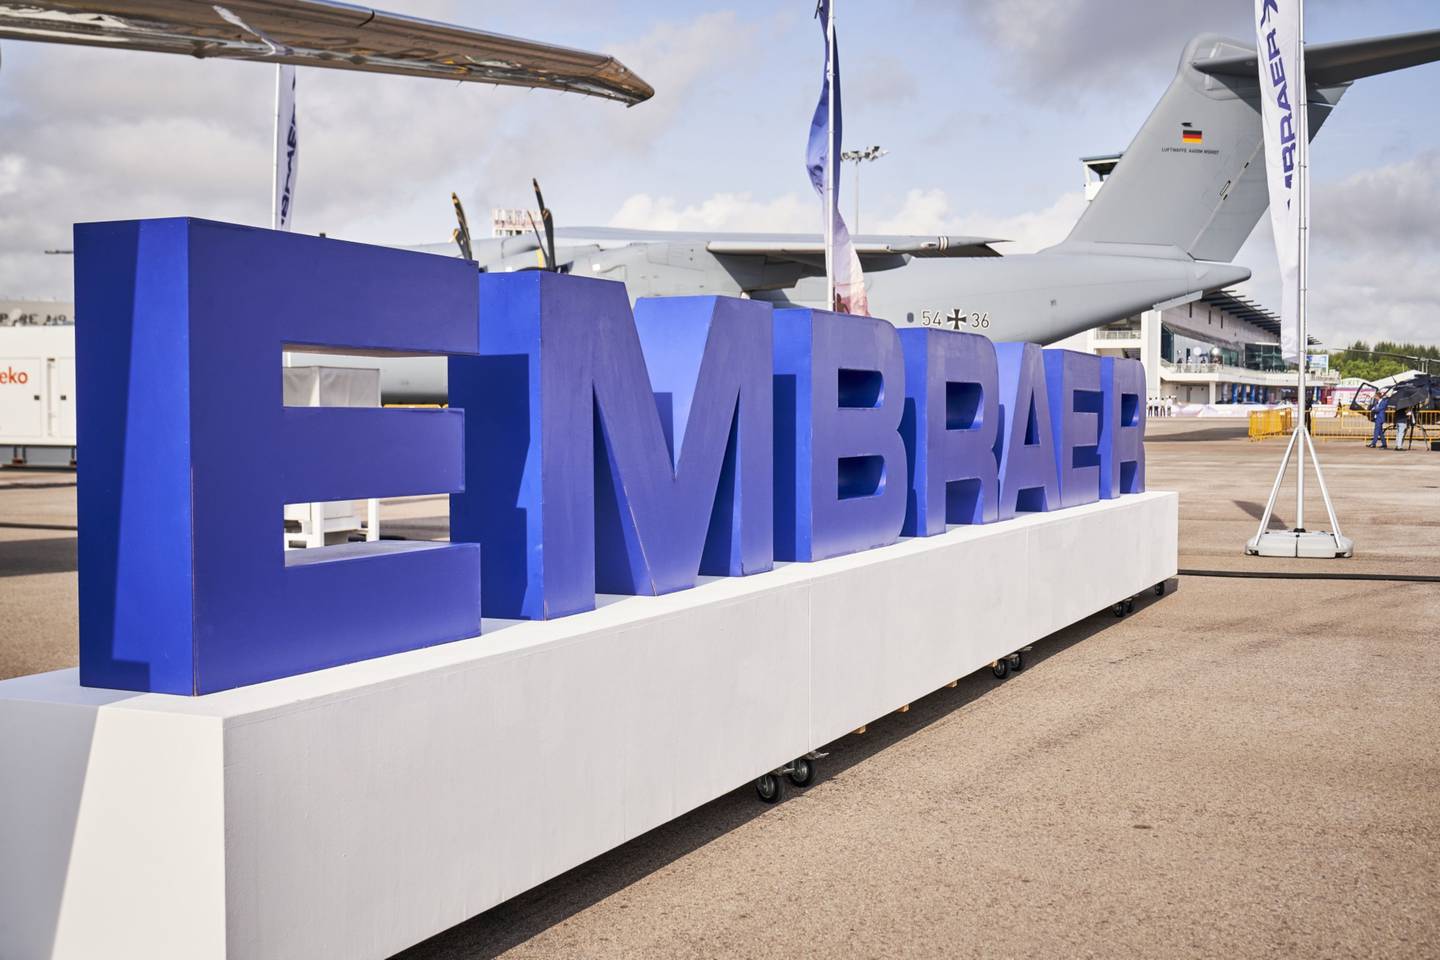 Agreeing to a deal with Embraer will add a third aircraft manufacturer to Singapore Airlines.